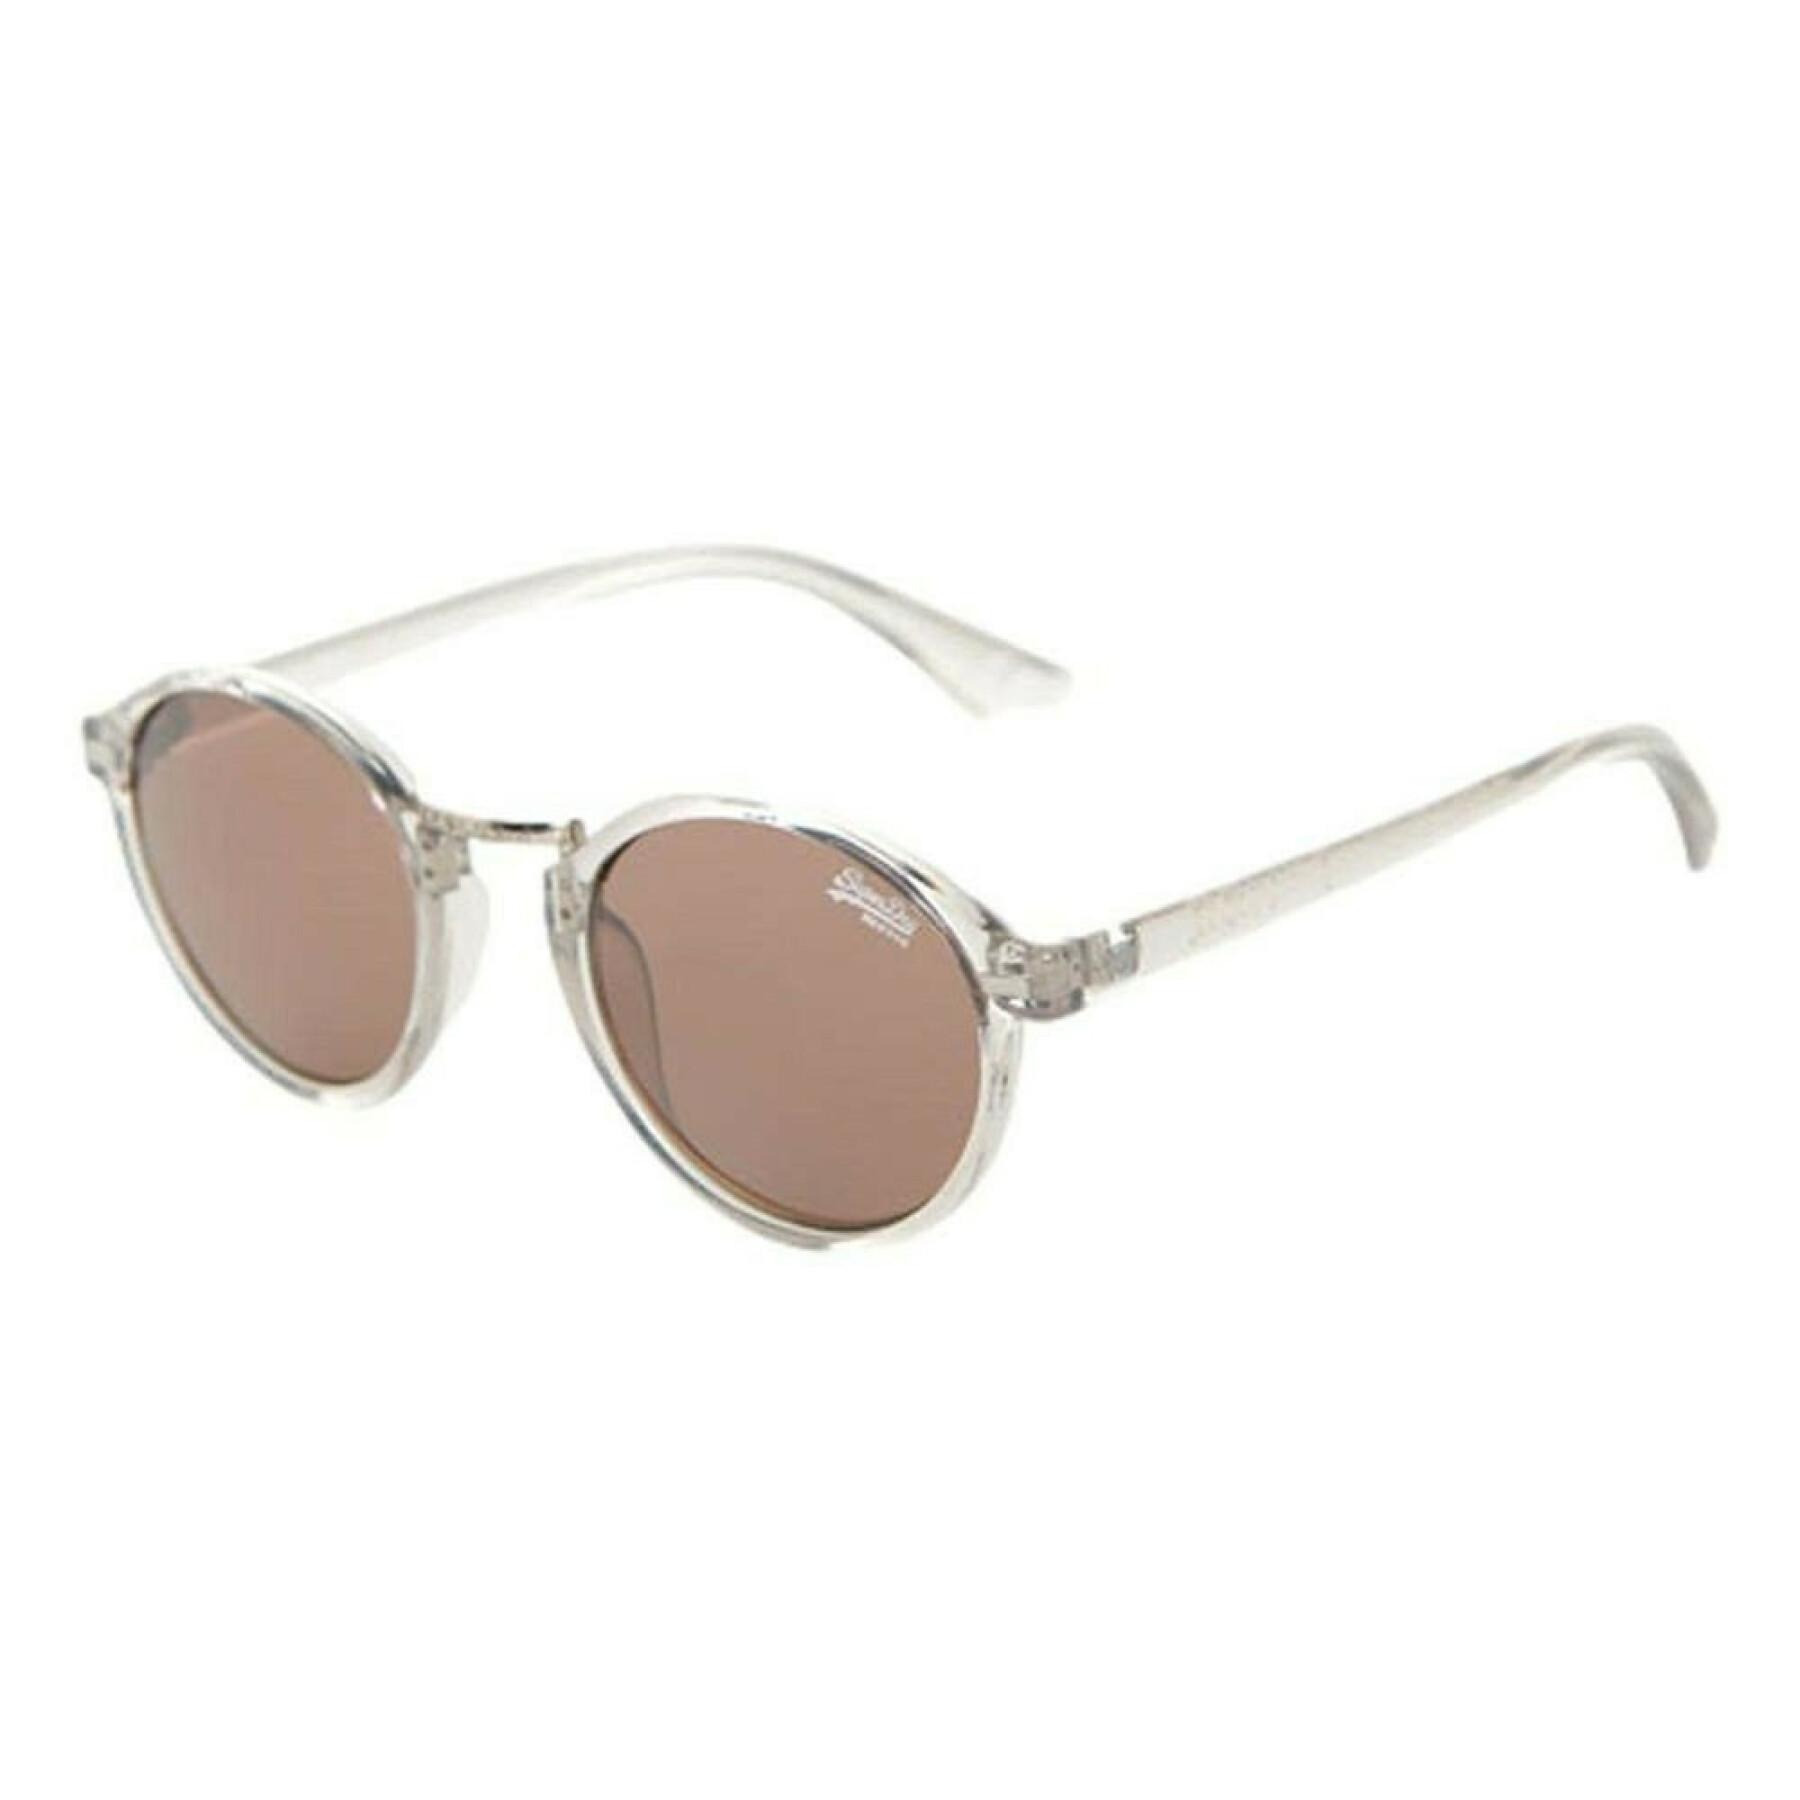 Women's sunglasses Superdry Copperfill